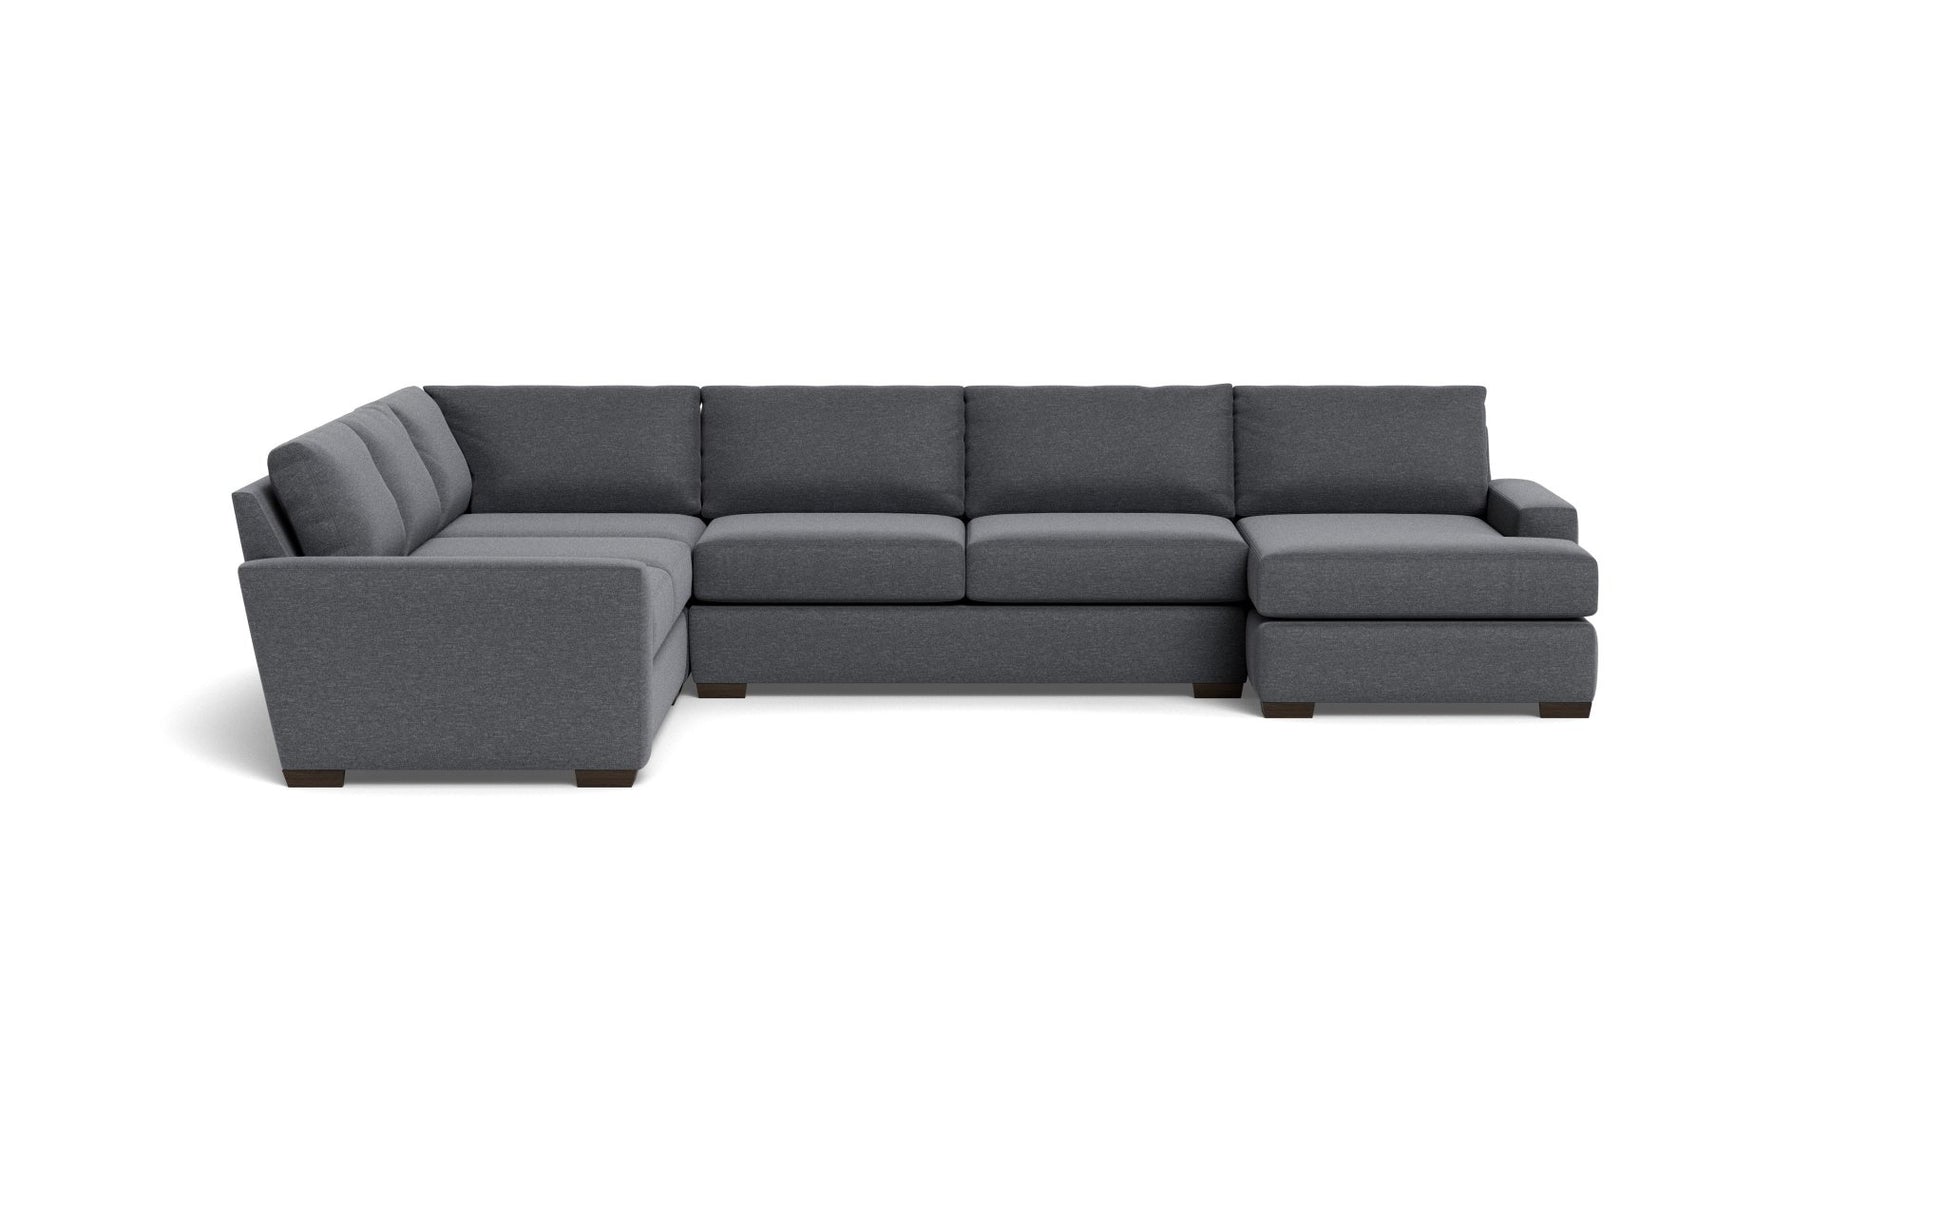 Mas Mesa Corner Sectional w. Right Chaise - Bennett Charcoal